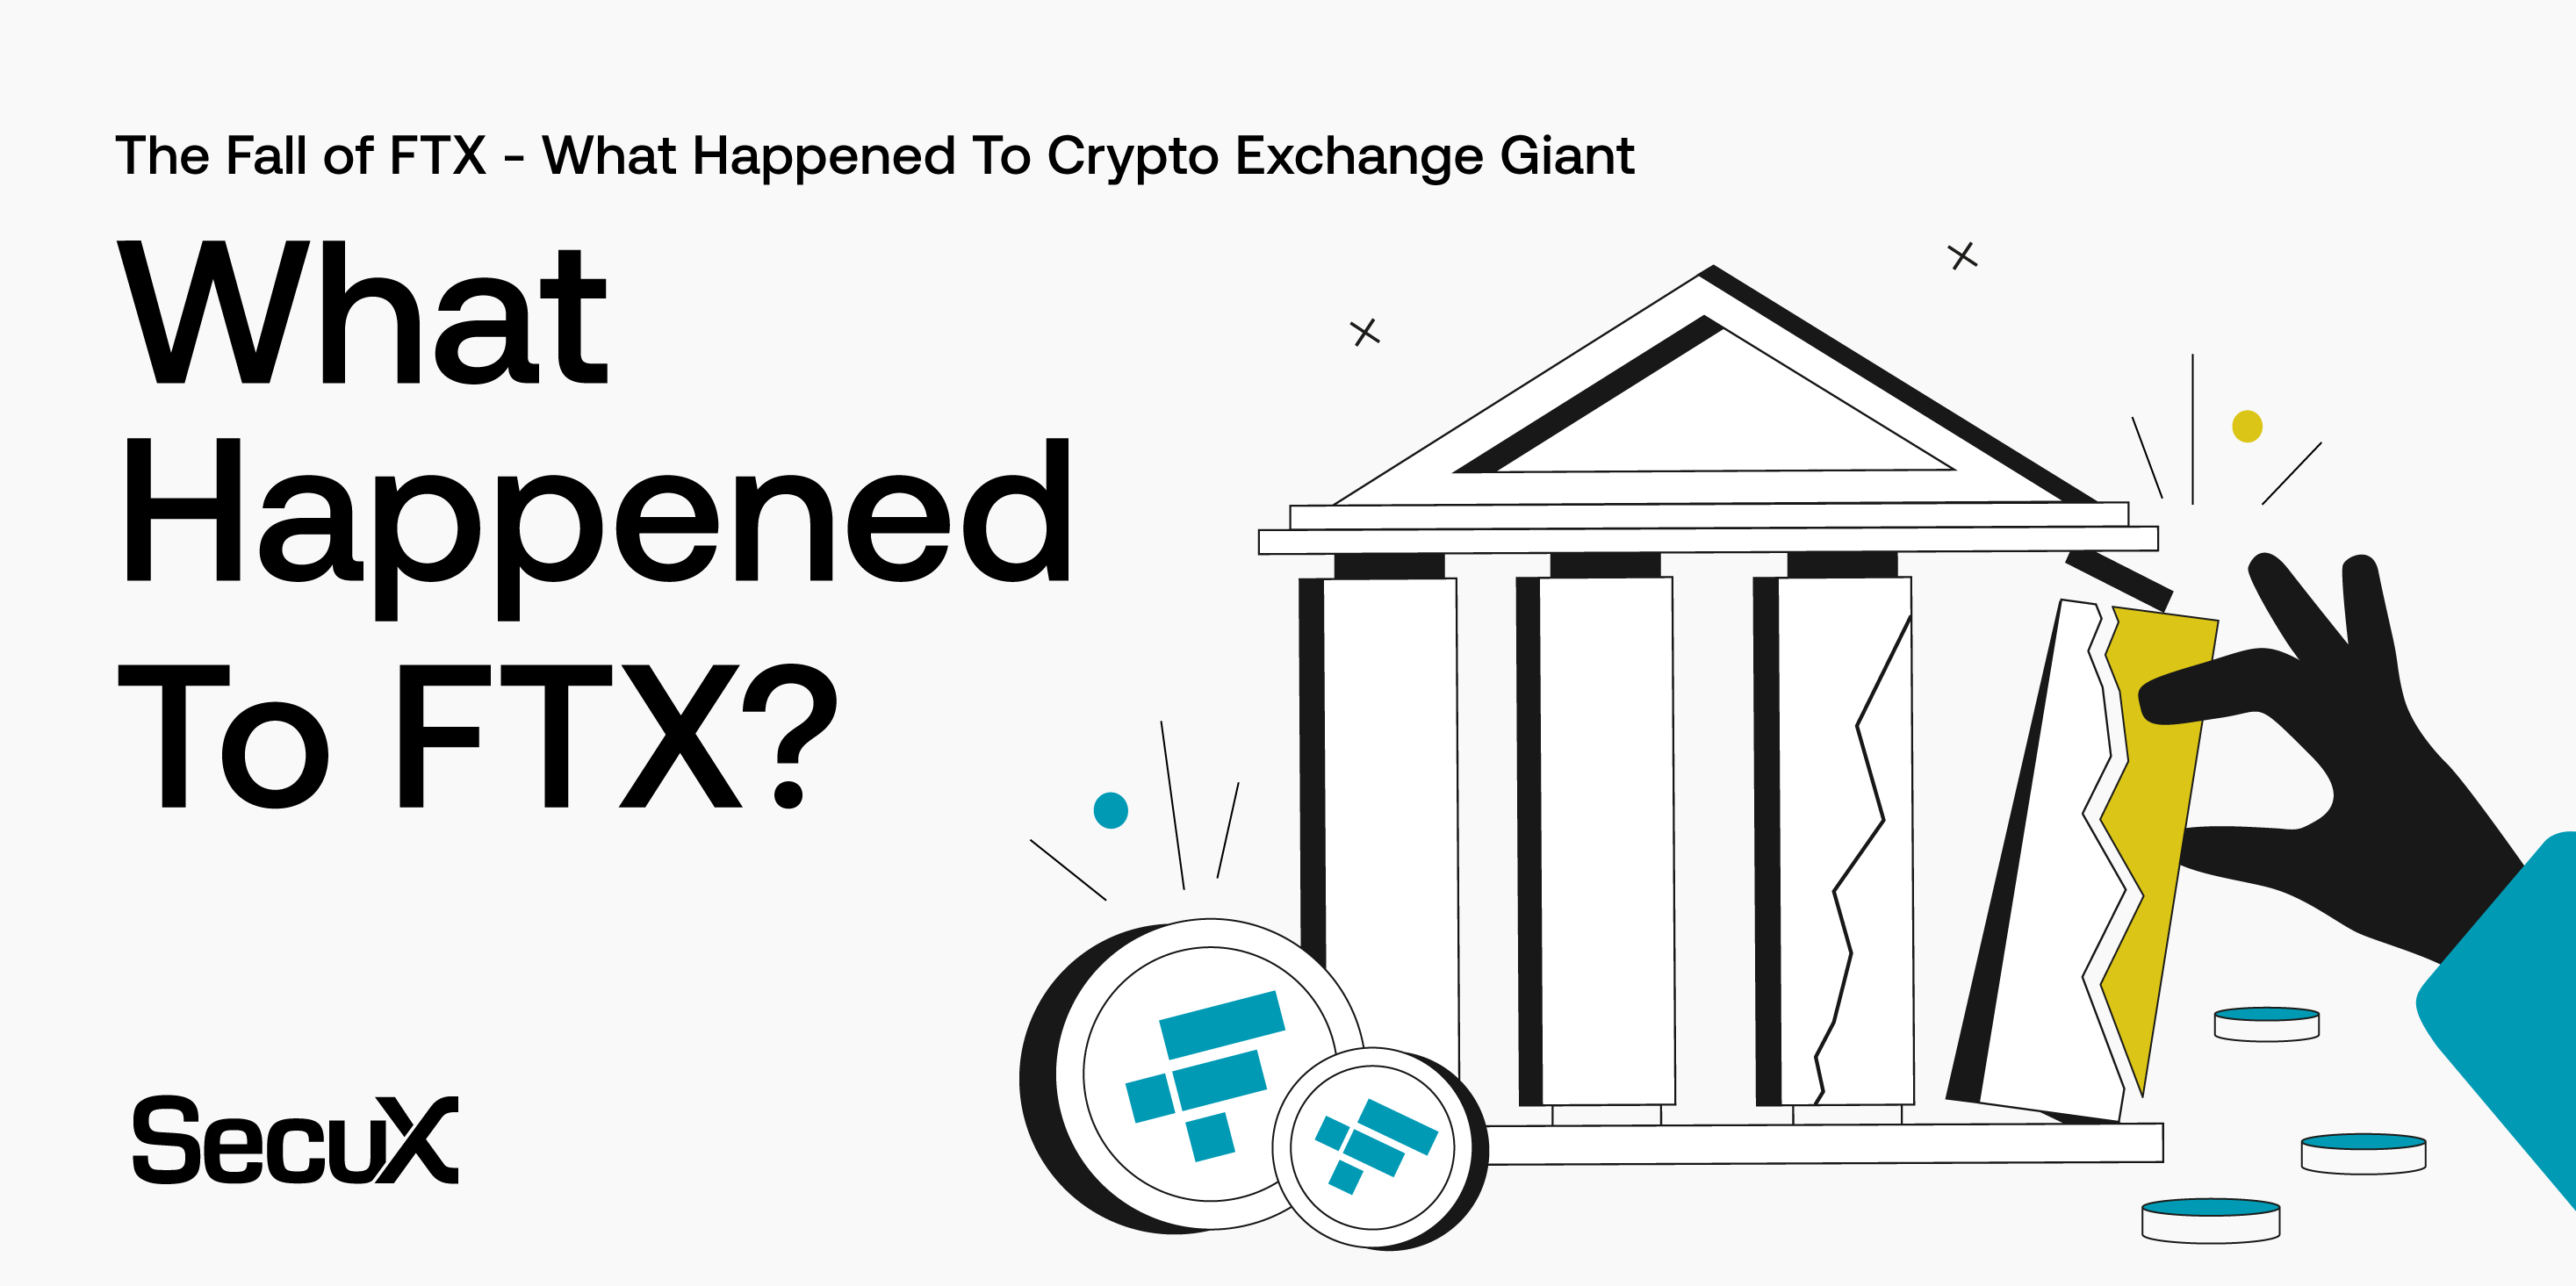 What Happened to Cryptocurrency Exchange FTX?